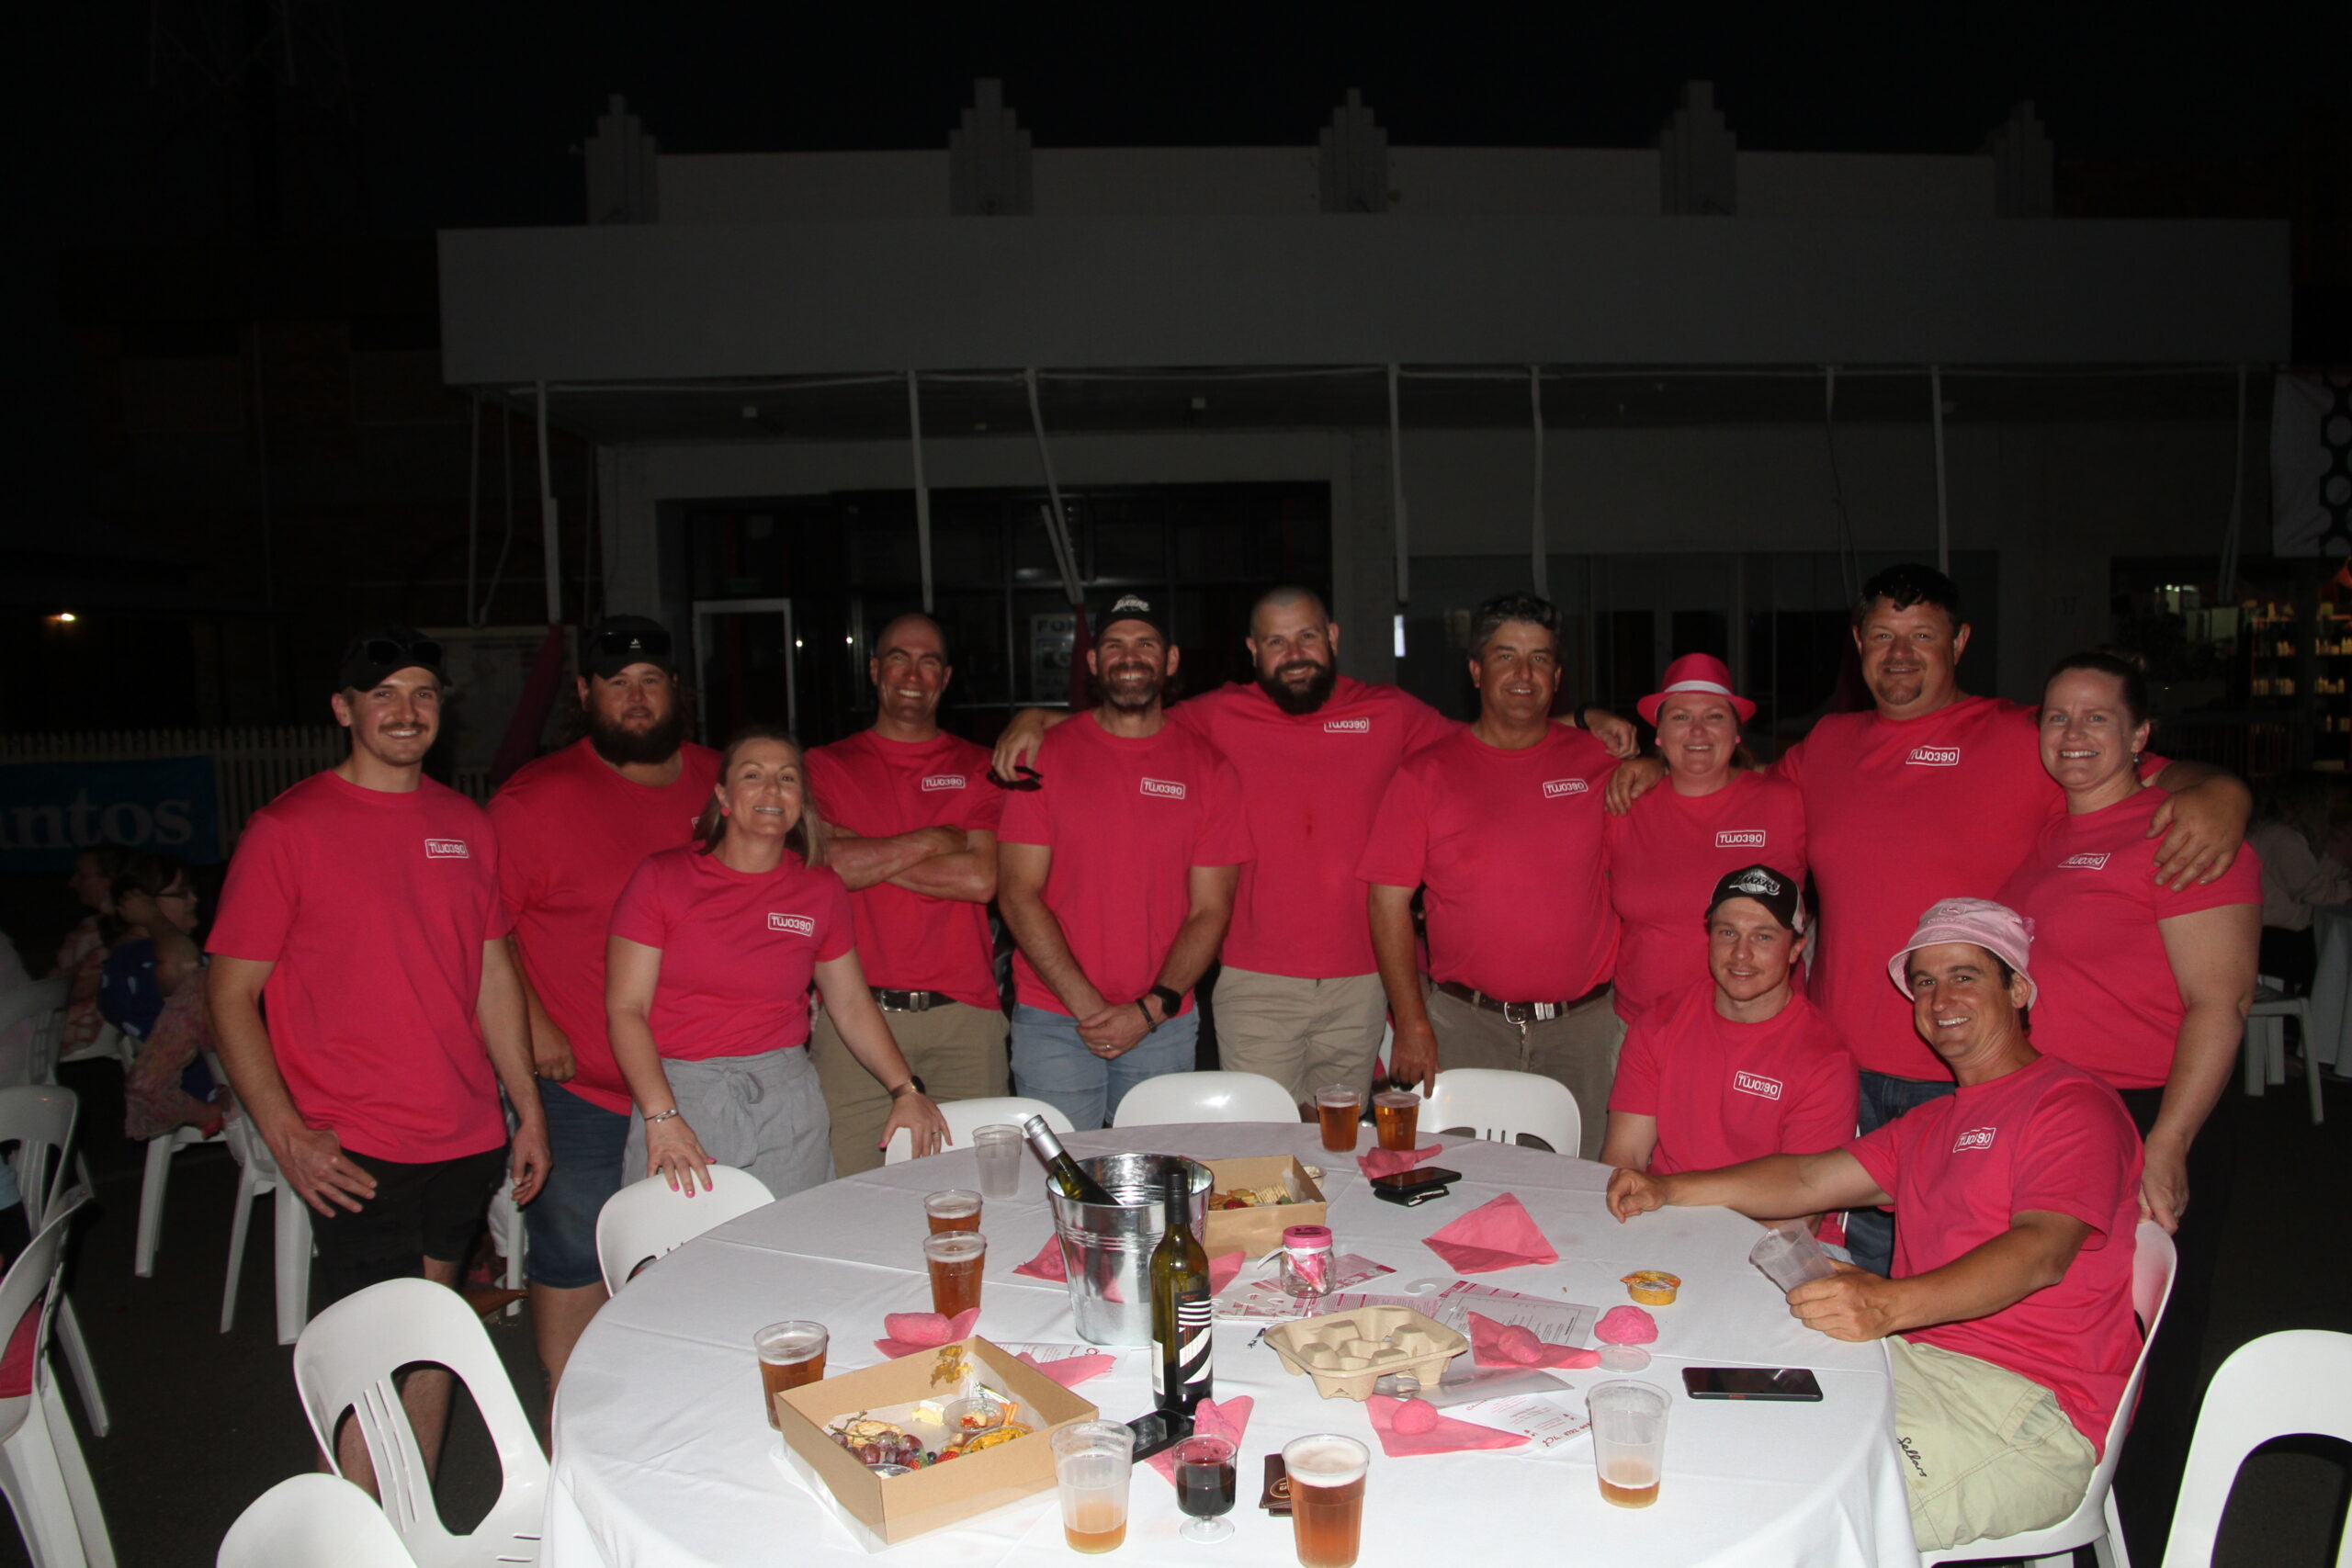 Resplendent in pink on Saturday night, the Phoenix 2390 Pink Up fundraiser supporters, from left, Luke Bailey, Jamie Woodin, Brendon Warnock, Lachlan Cameron, Aaron Stoltenberg, Cameron Lennox, Lisa Mullins, Todd Stanford and Sally Stoltenberg. Front, Megan Cameron, Sam Sadler and Andrew Mullins.